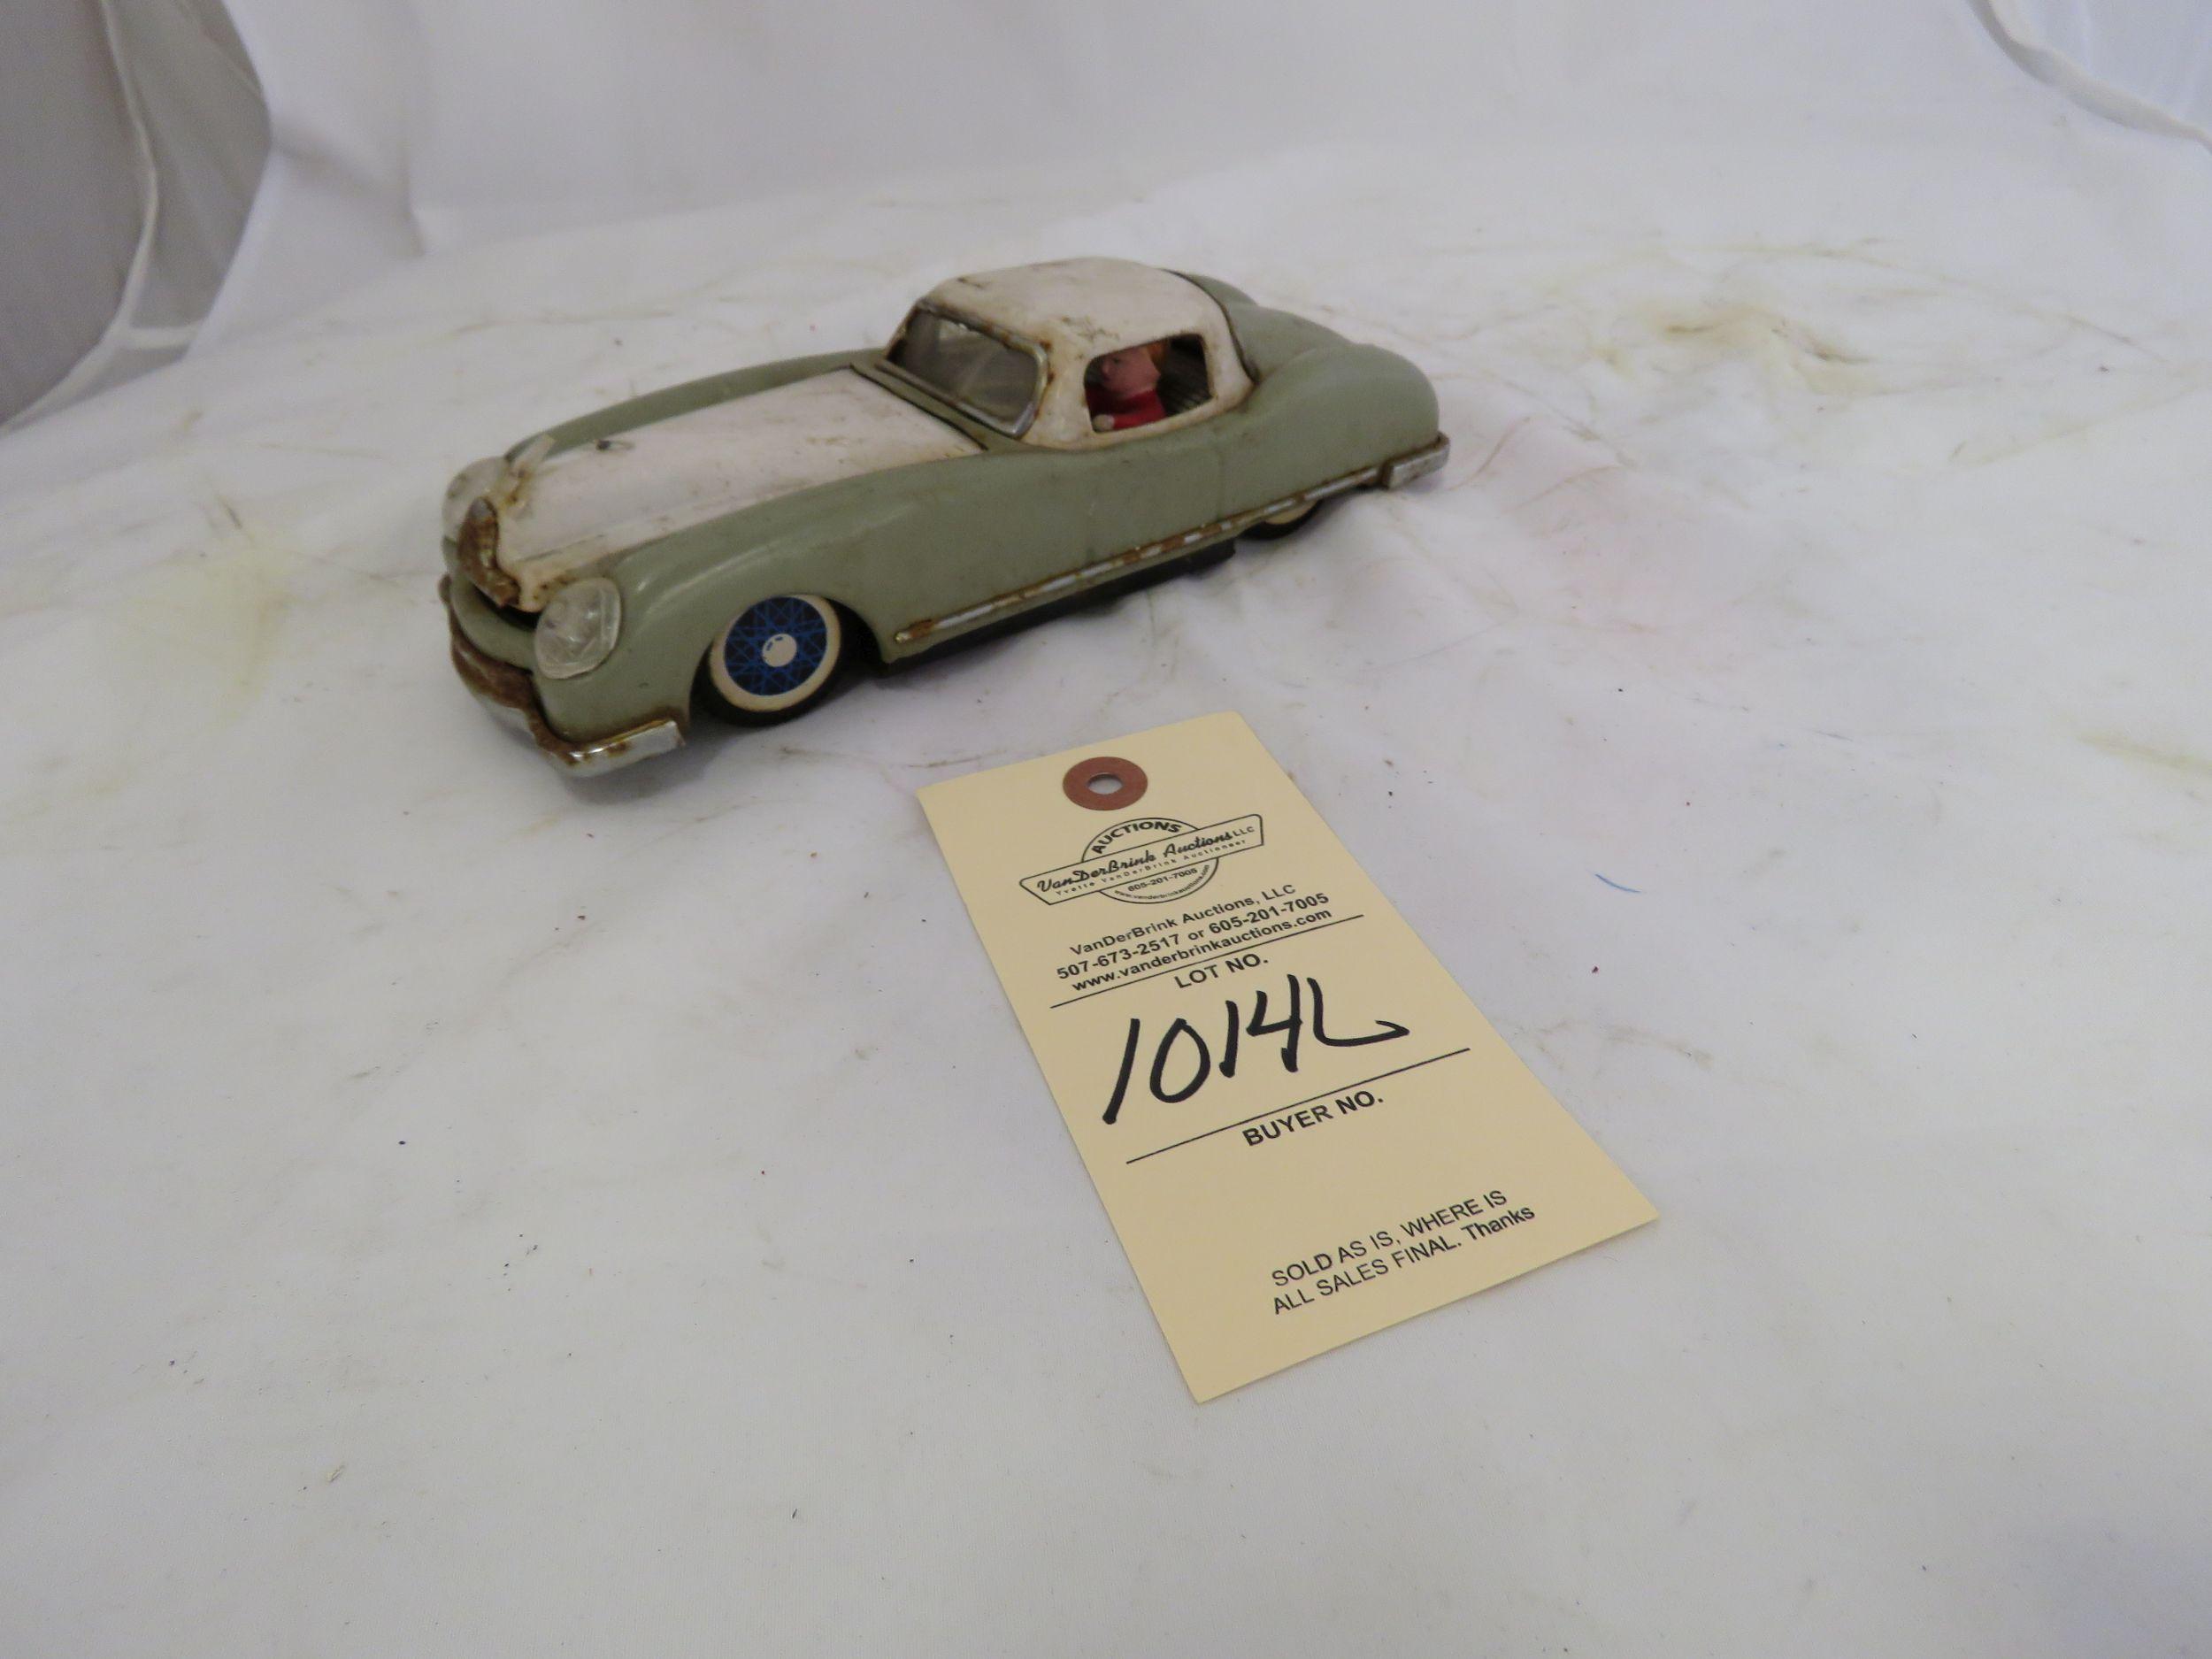 European Style Pressed Tin toy with Driver